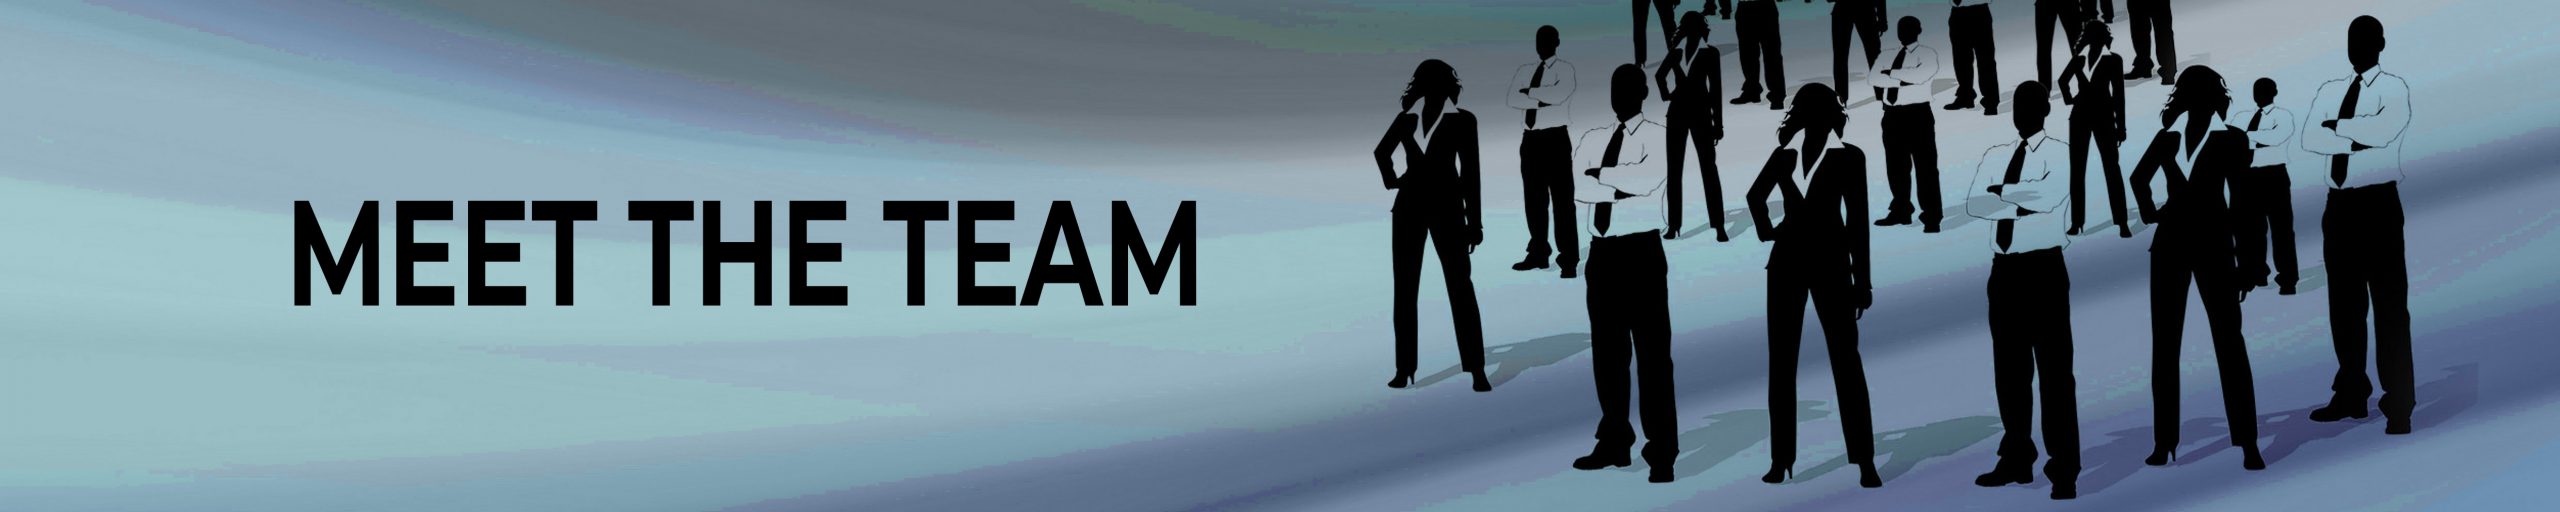 Free image/jpeg, Resolution: 4961x1804, File size: 807Kb, people silhouettes on blue stripes banner